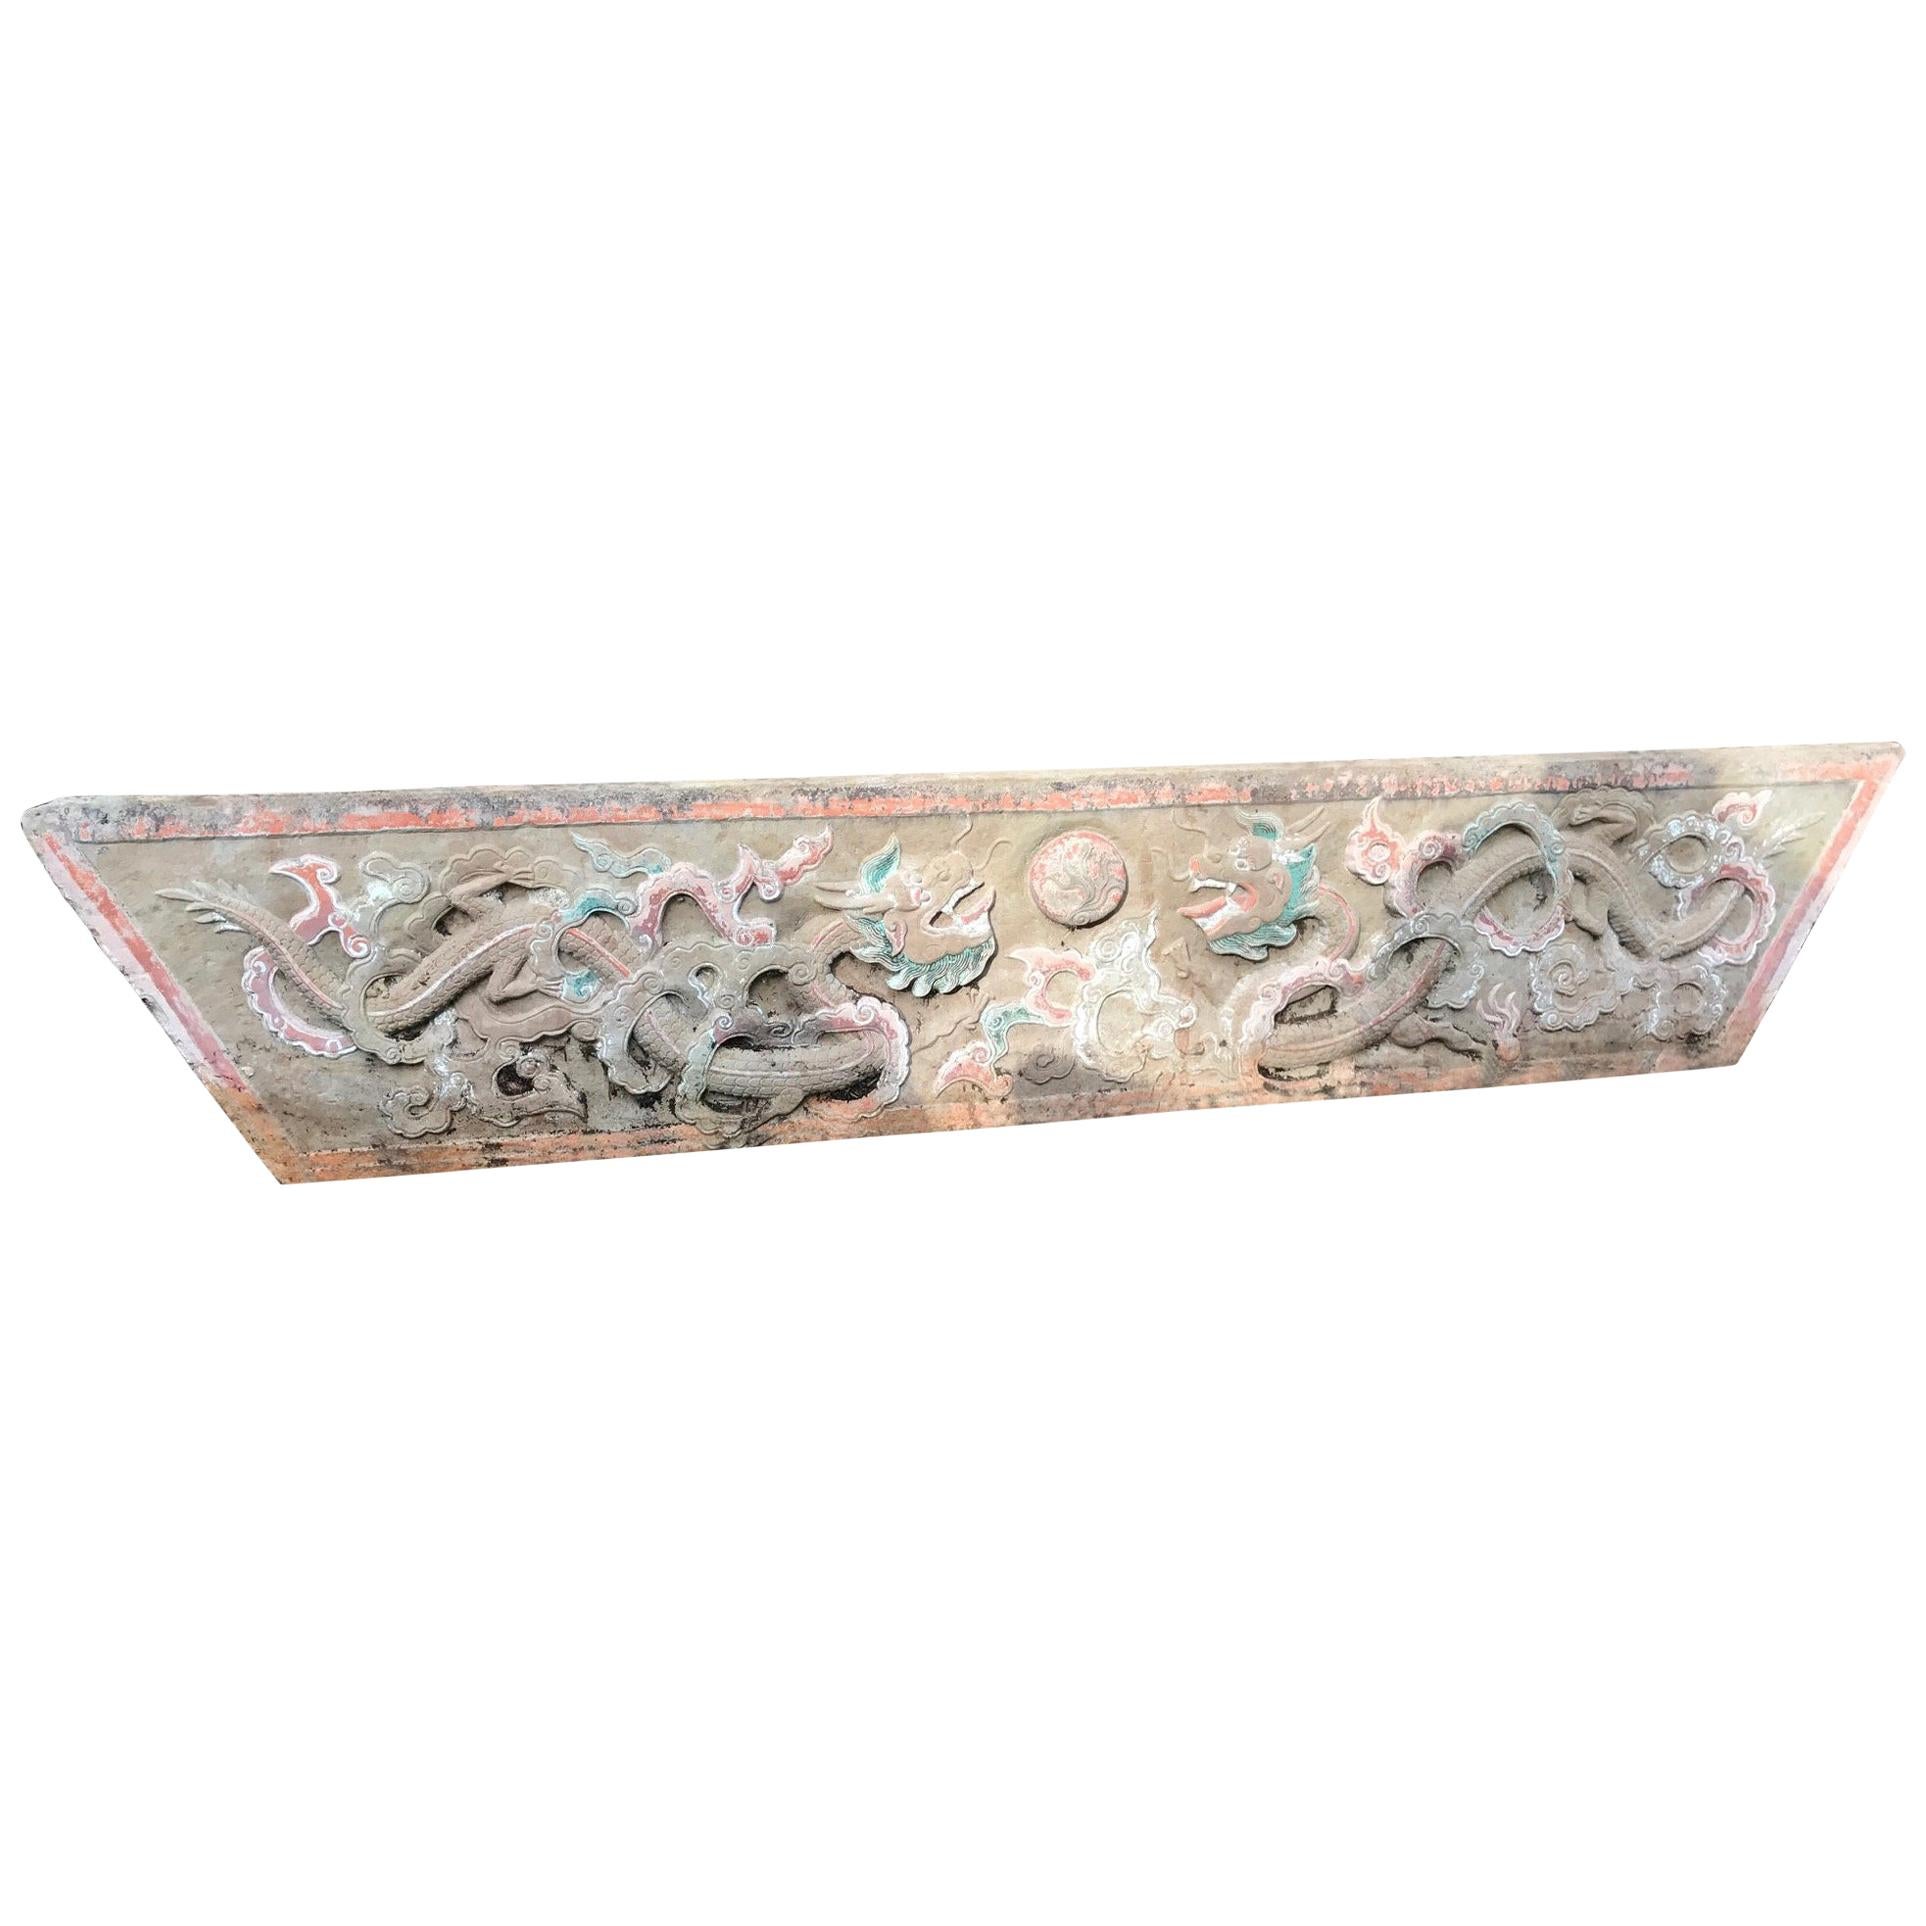 Here's one of the most beautiful Chinese antiques we have ever found in our travels in China over the past three decades.

This is a one-of-a-kind antique sandstone lintel which when installed and displayed could be a handsome addition to your